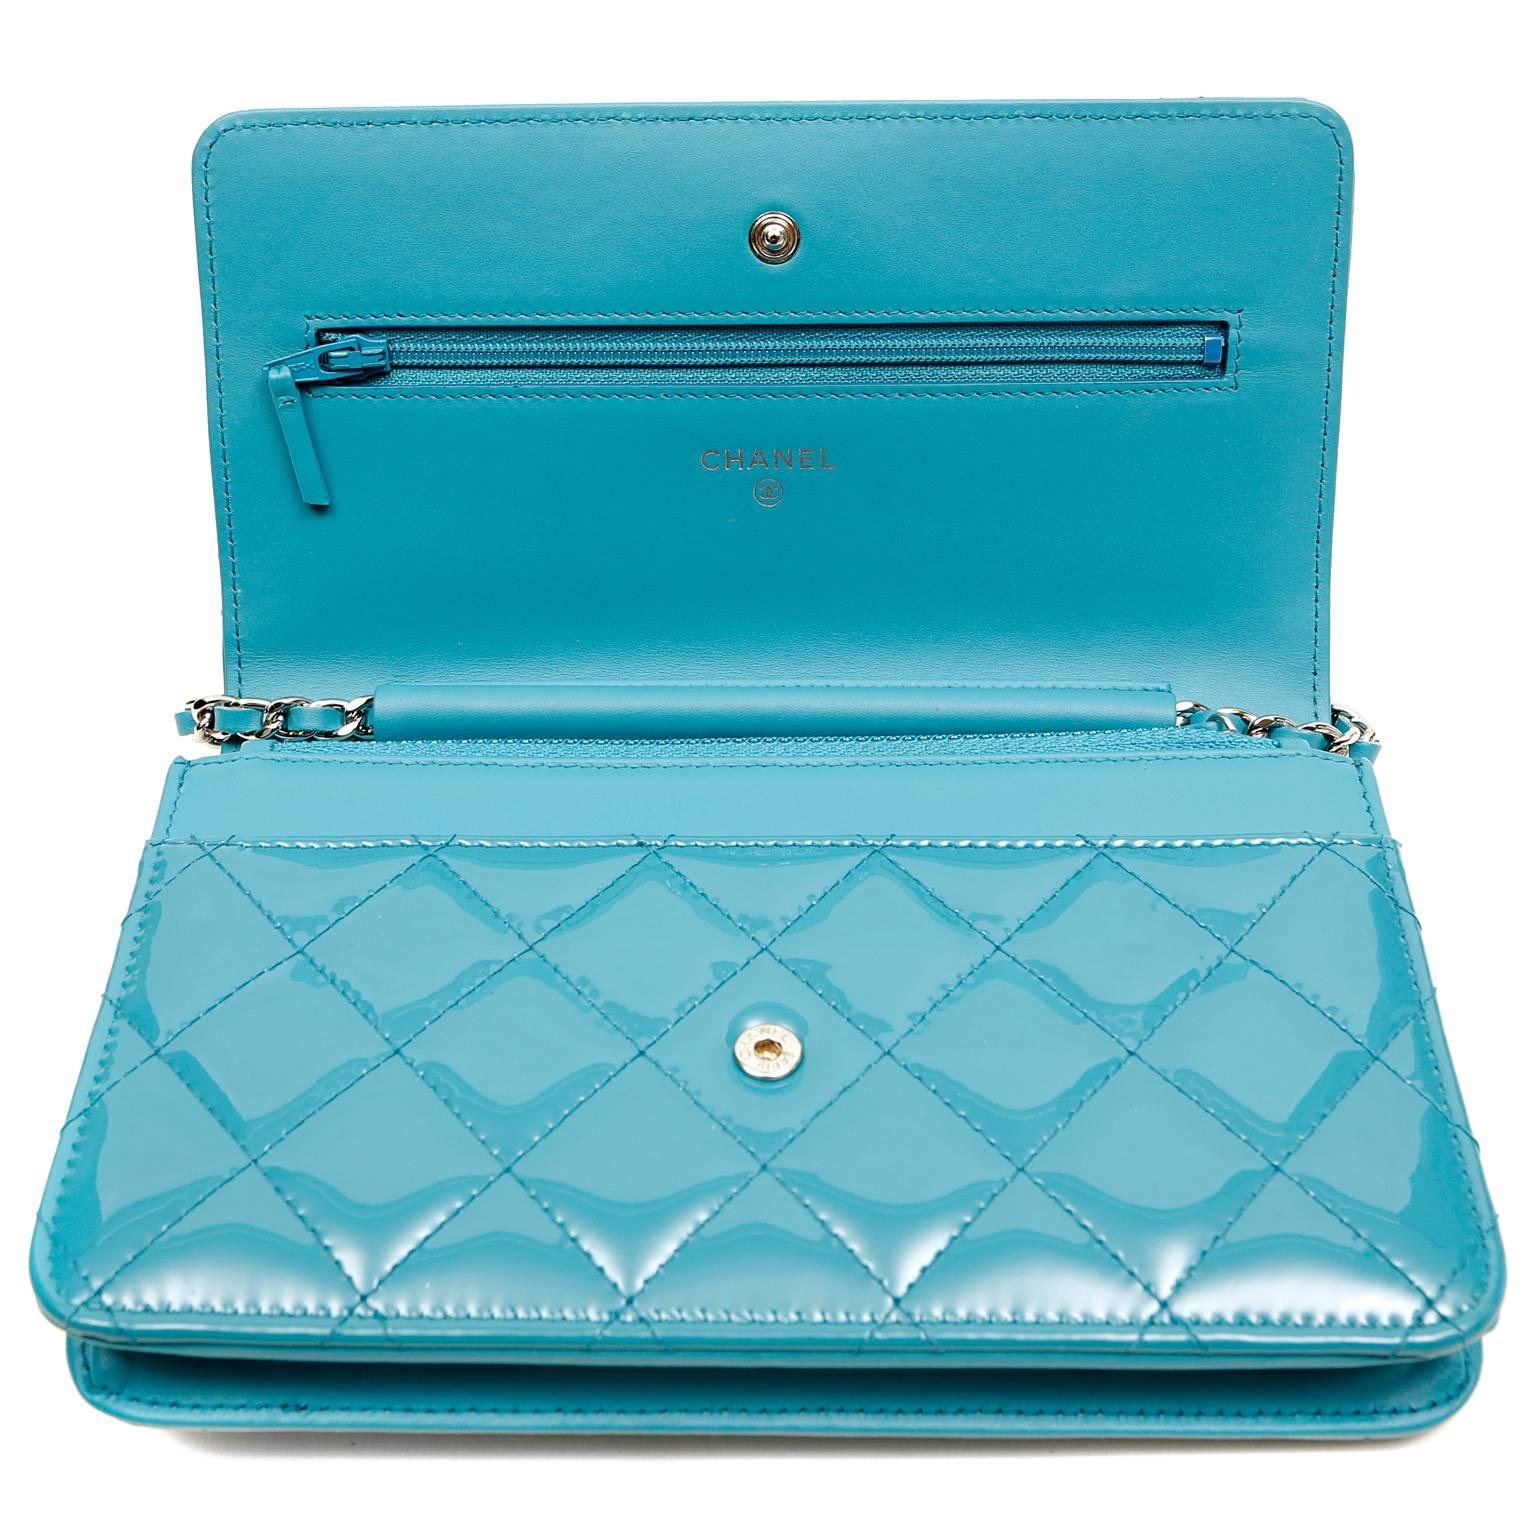 Chanel Turquoise Patent Leather Wallet on a Chain WOC- Silver HW 2